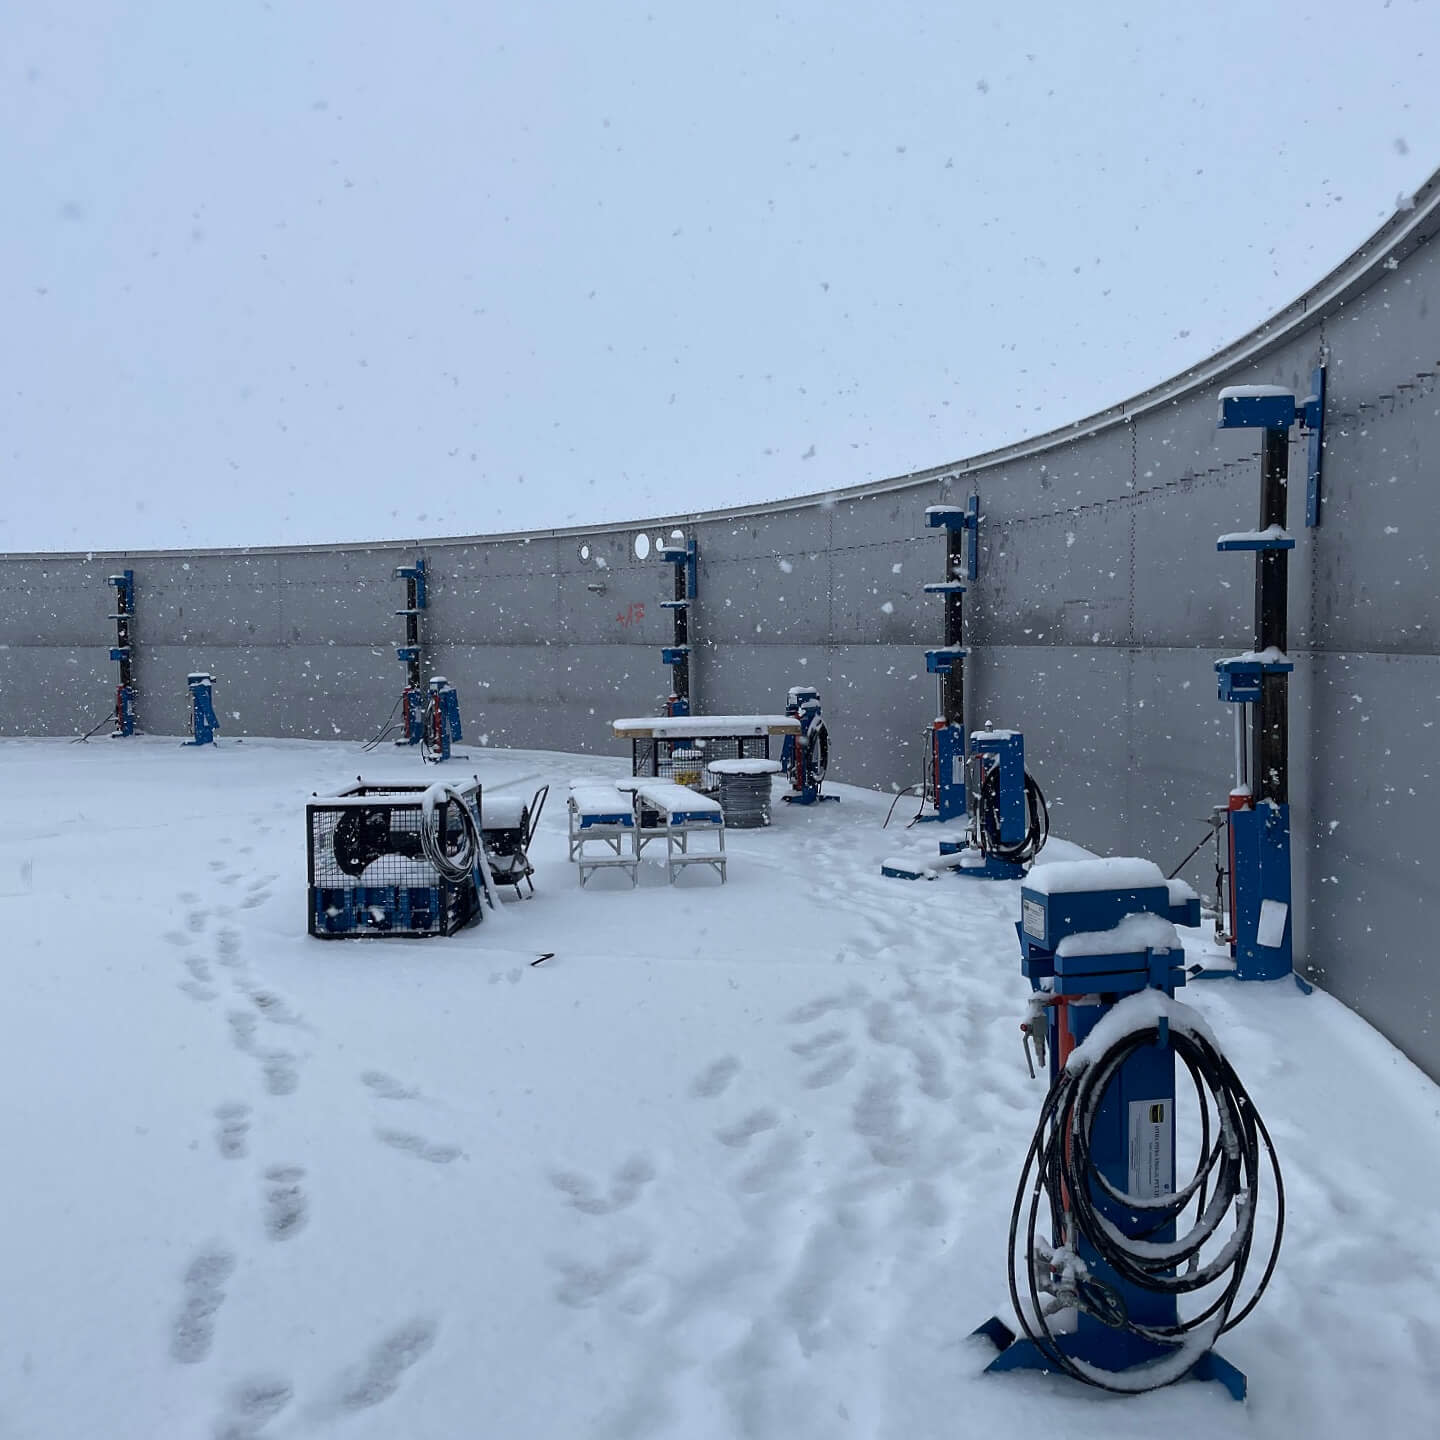 Energy stations covered in snow